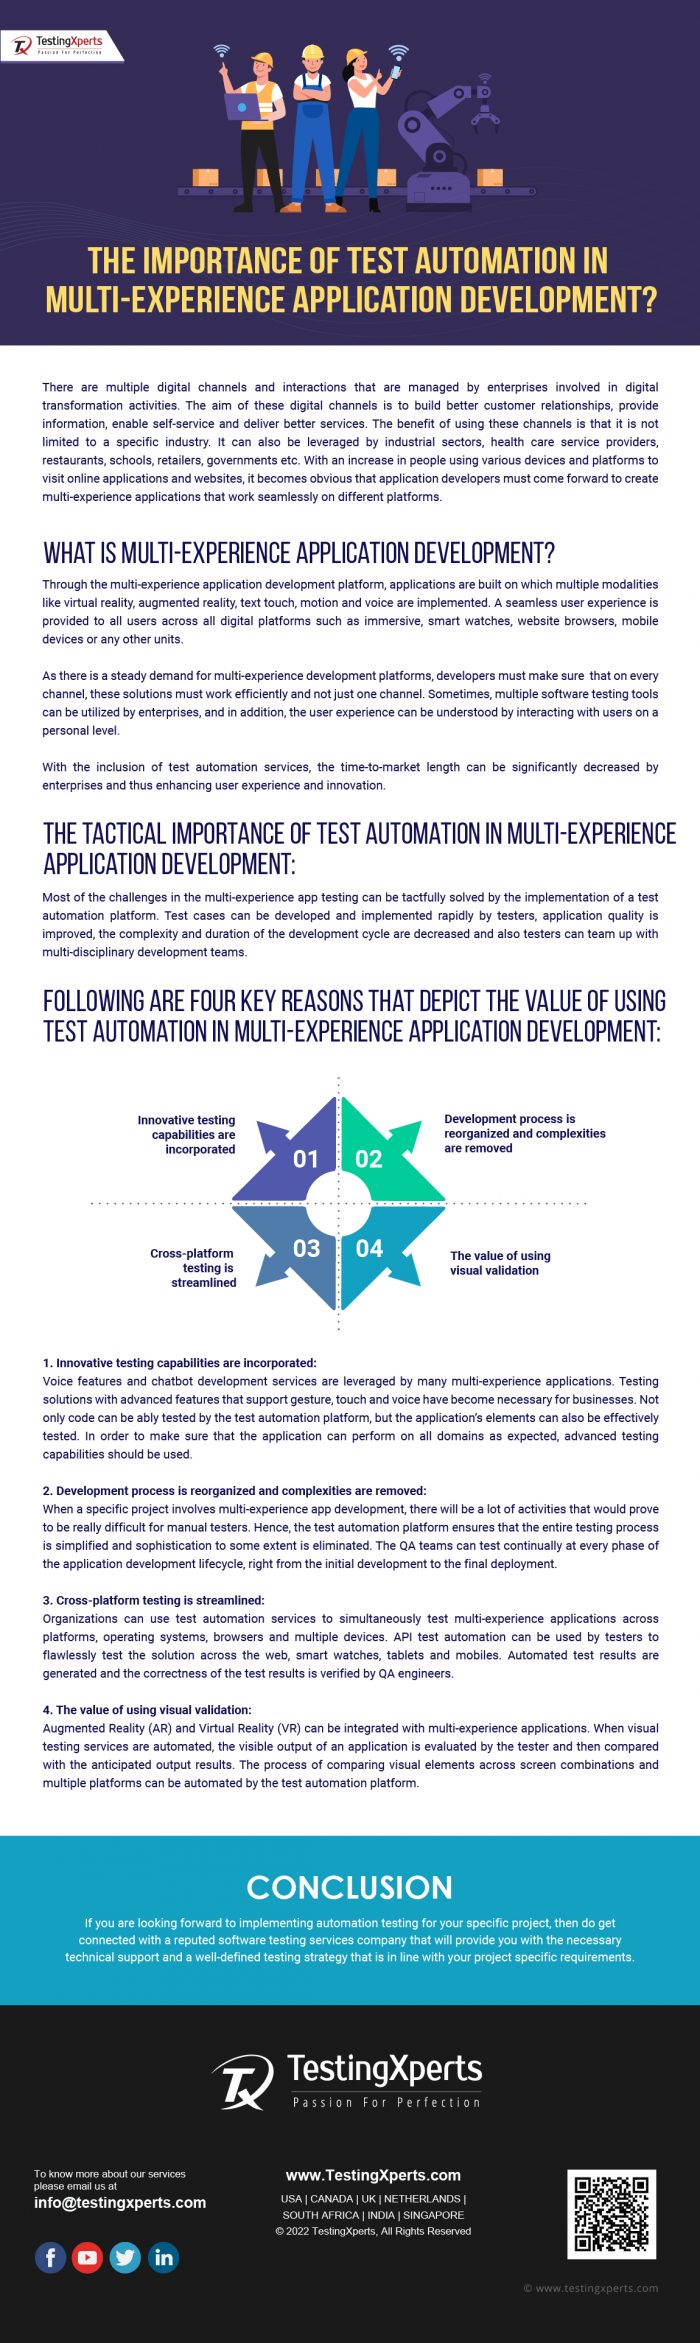 The Importance of Test Automation in Multi-Experience Application Development